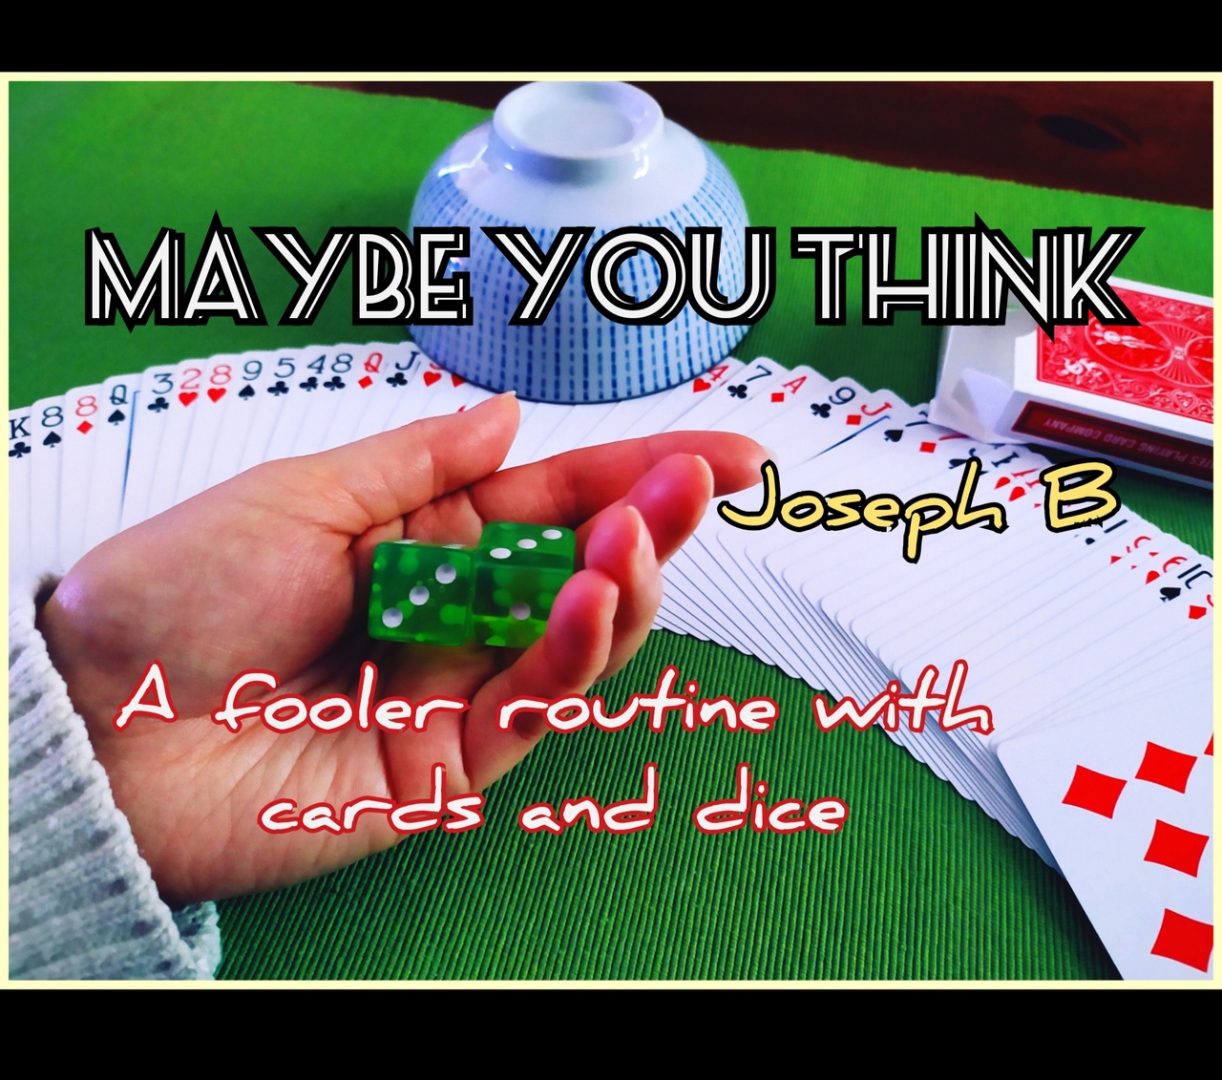 Maybe You Think by Joseph B (MP4 Video + PDF Download)